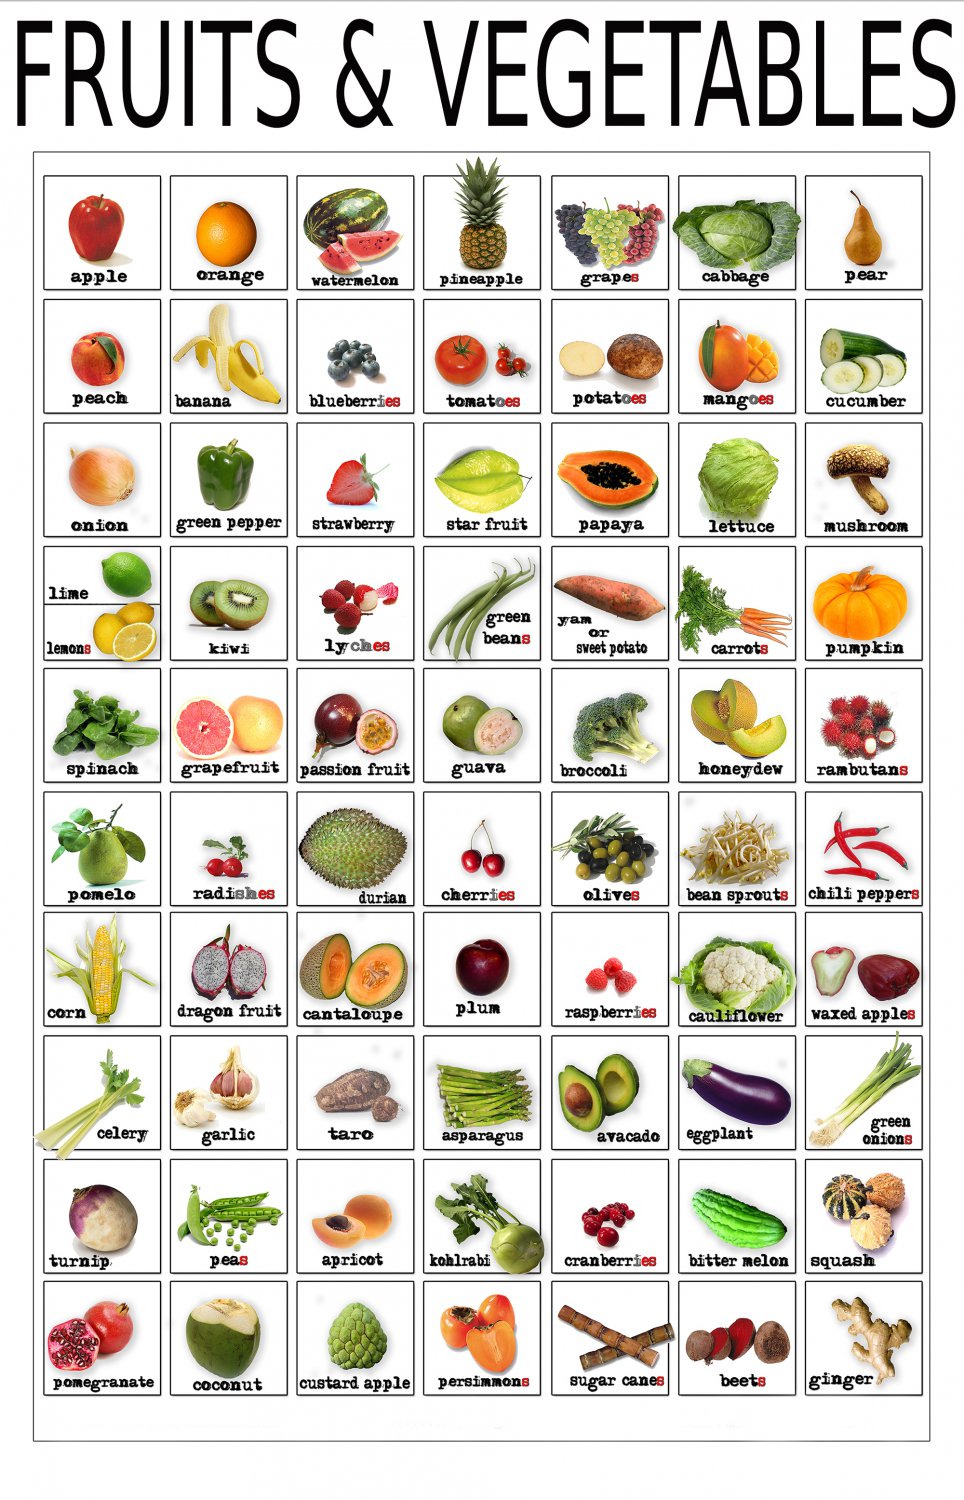 Fruits and Vegetables Infographic Chart  13"x19" (32cm/49cm) Canvas Print